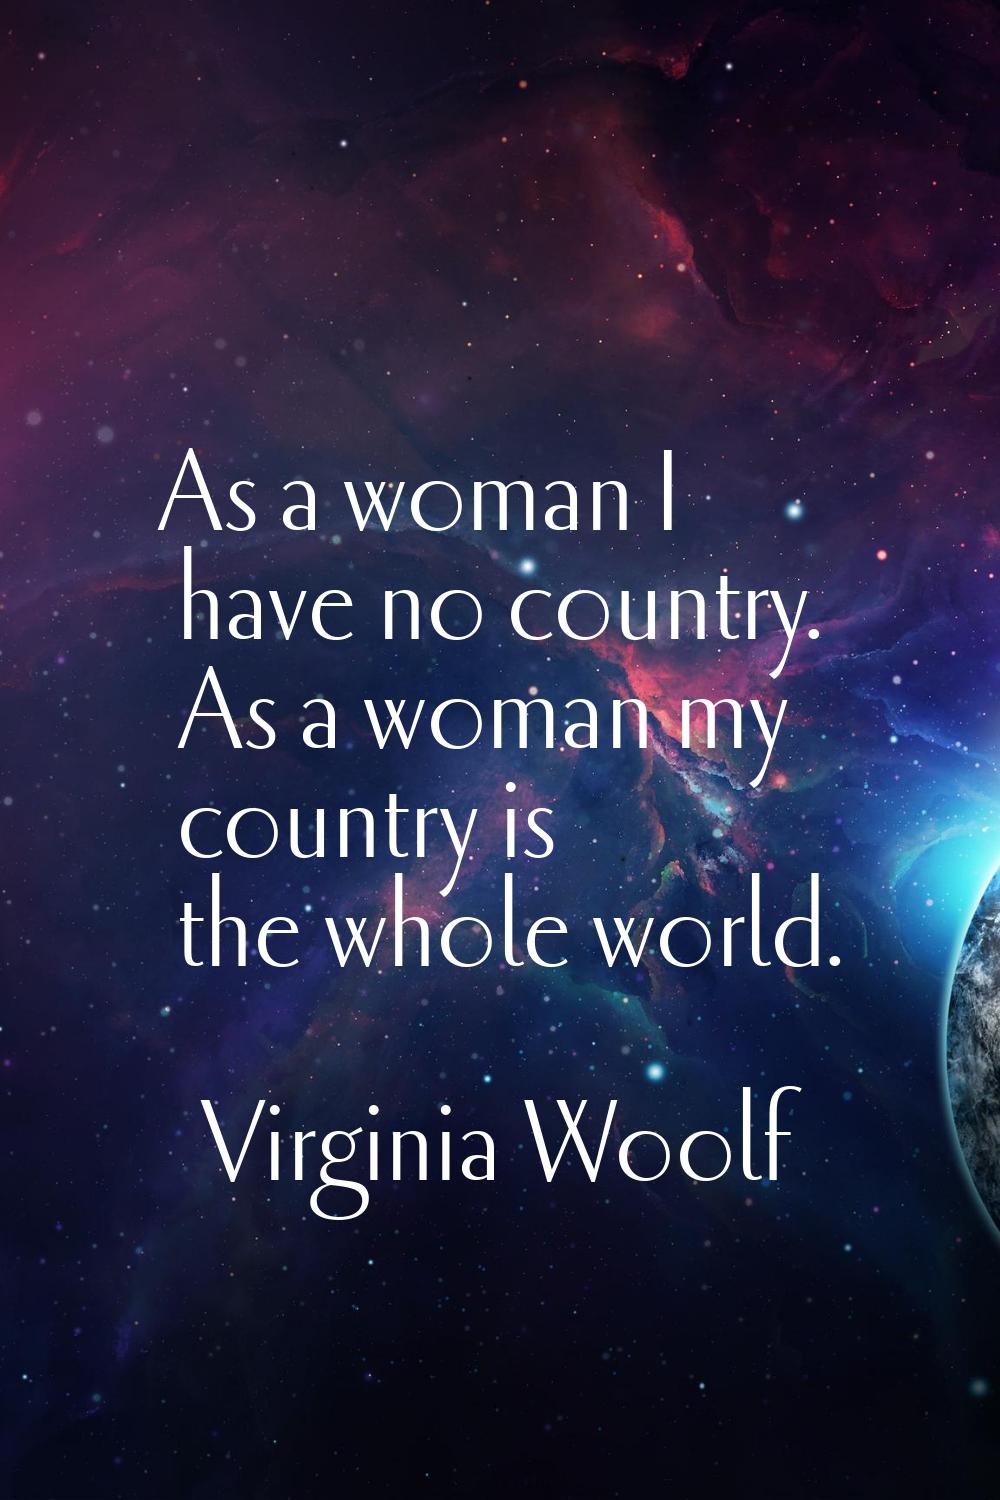 As a woman I have no country. As a woman my country is the whole world.